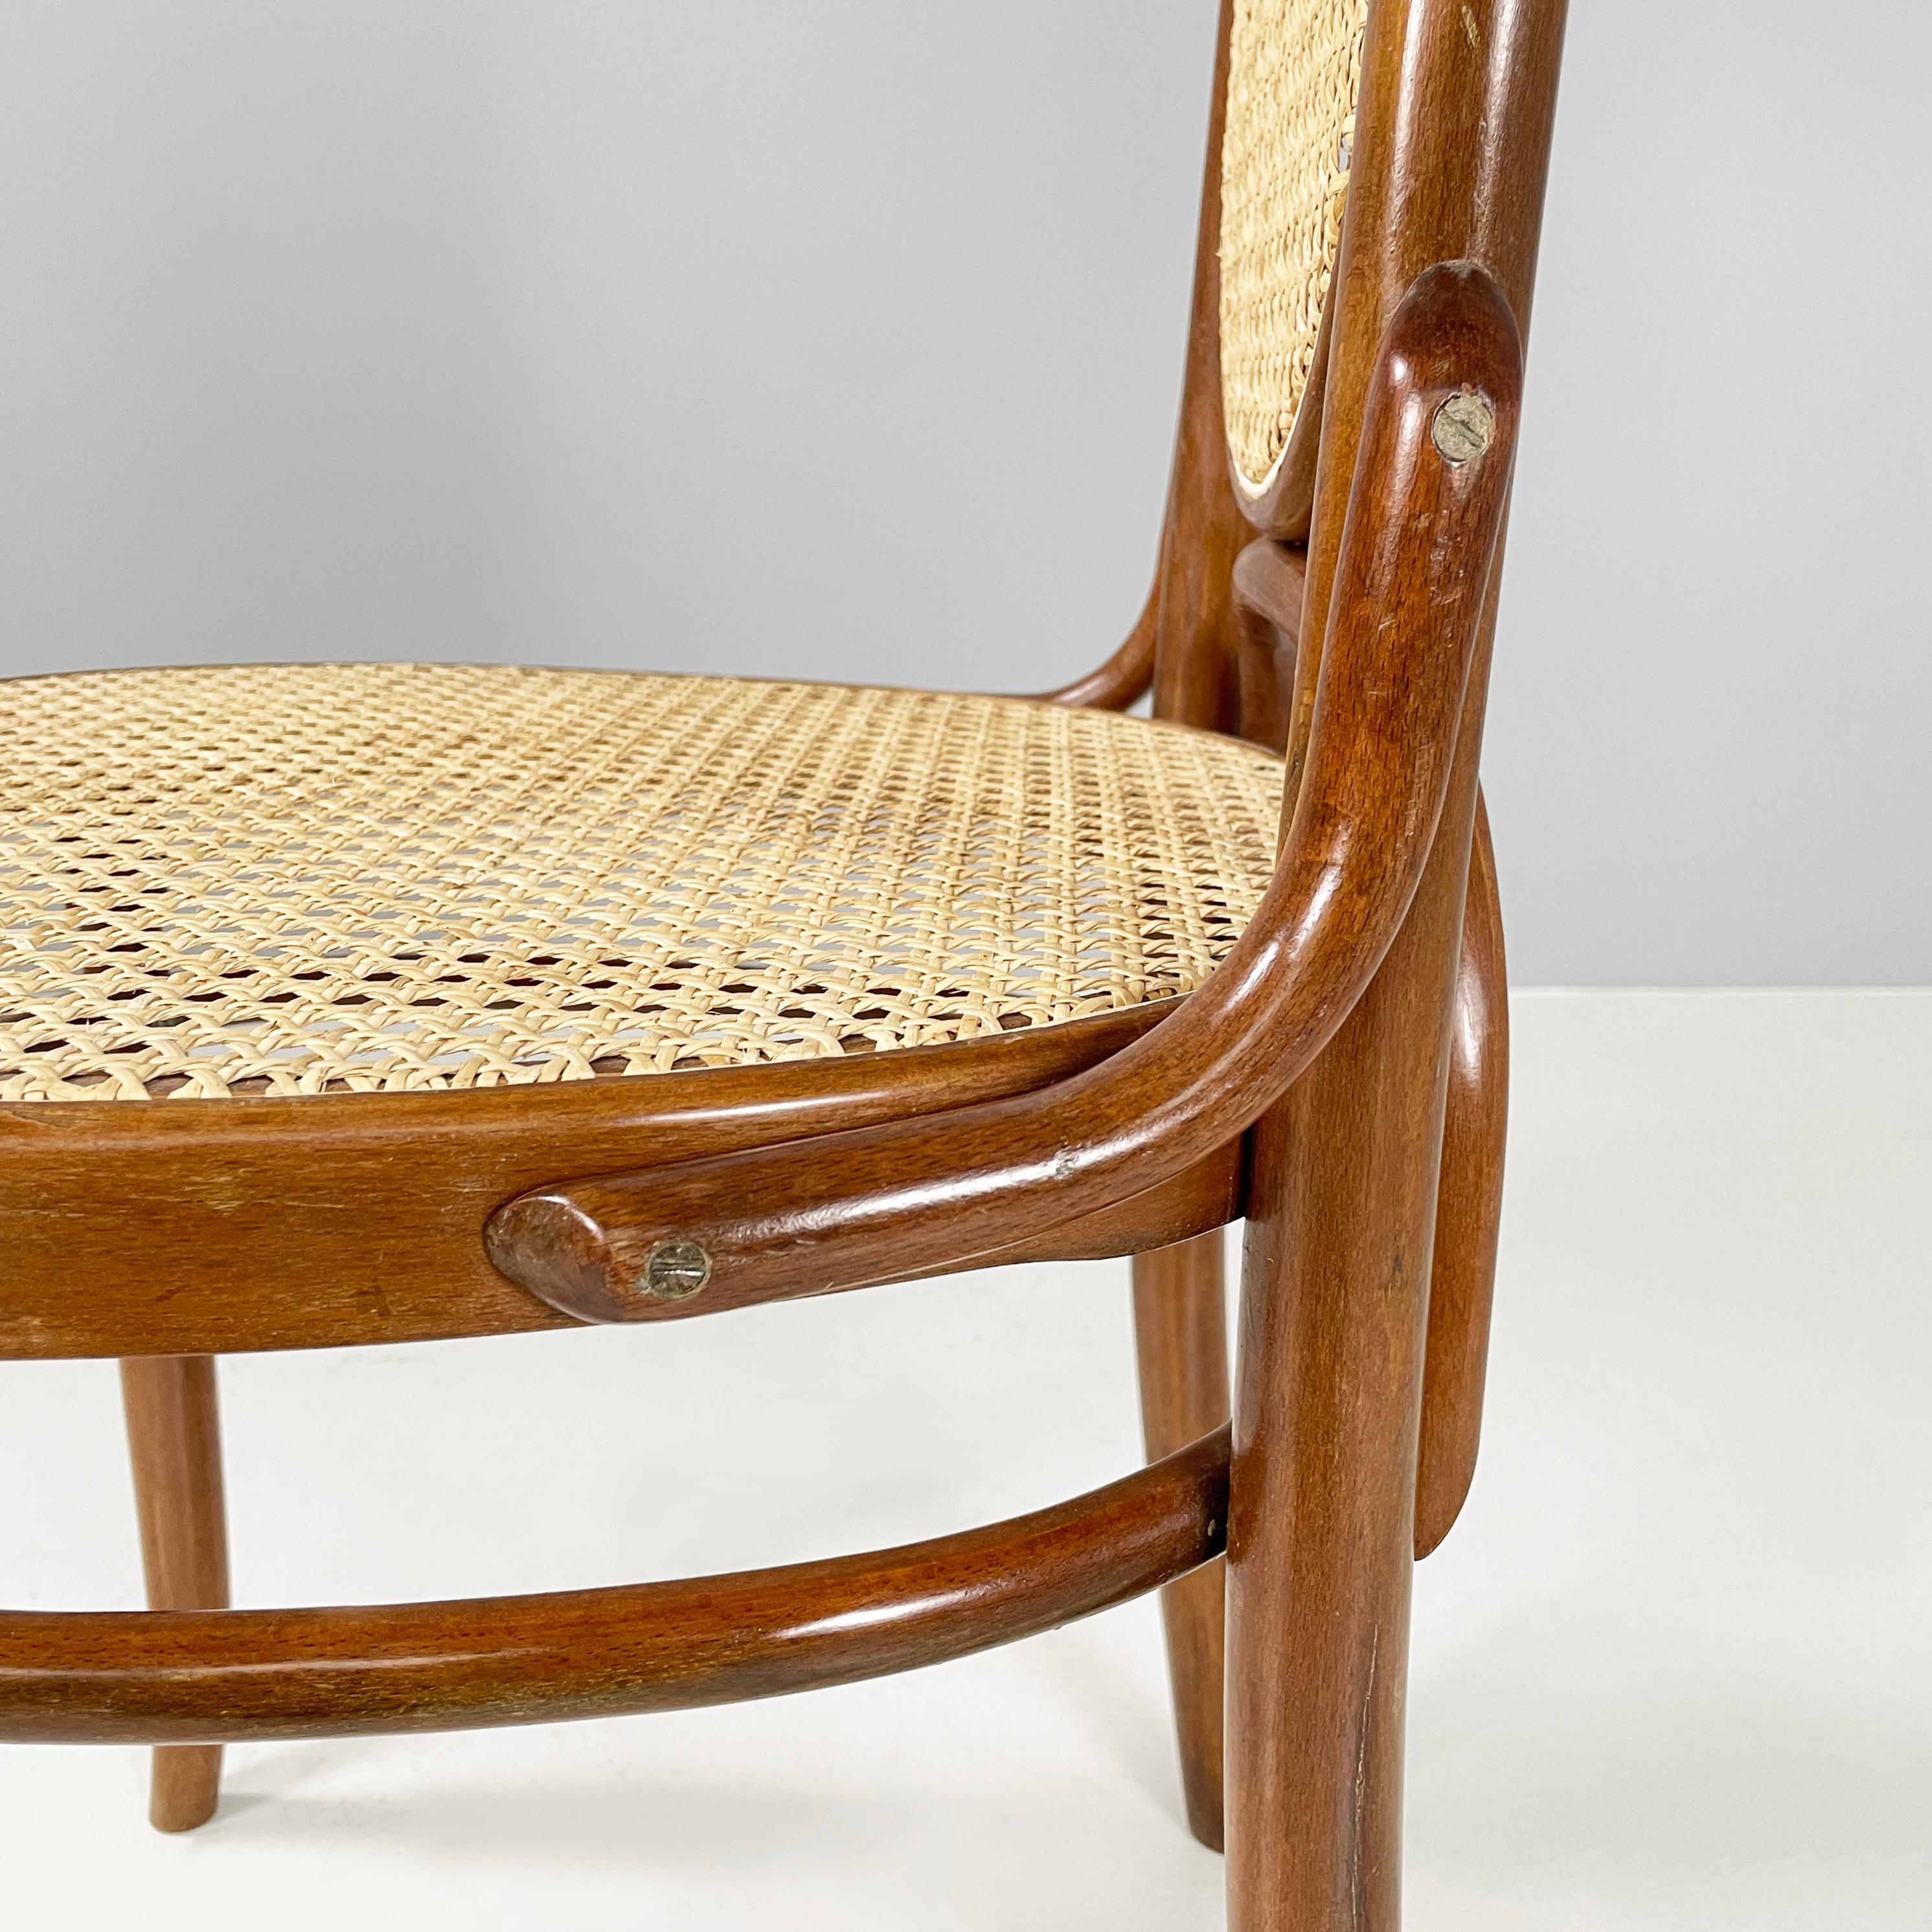 Italian Chair in straw and wood, 1900-1950s For Sale 8